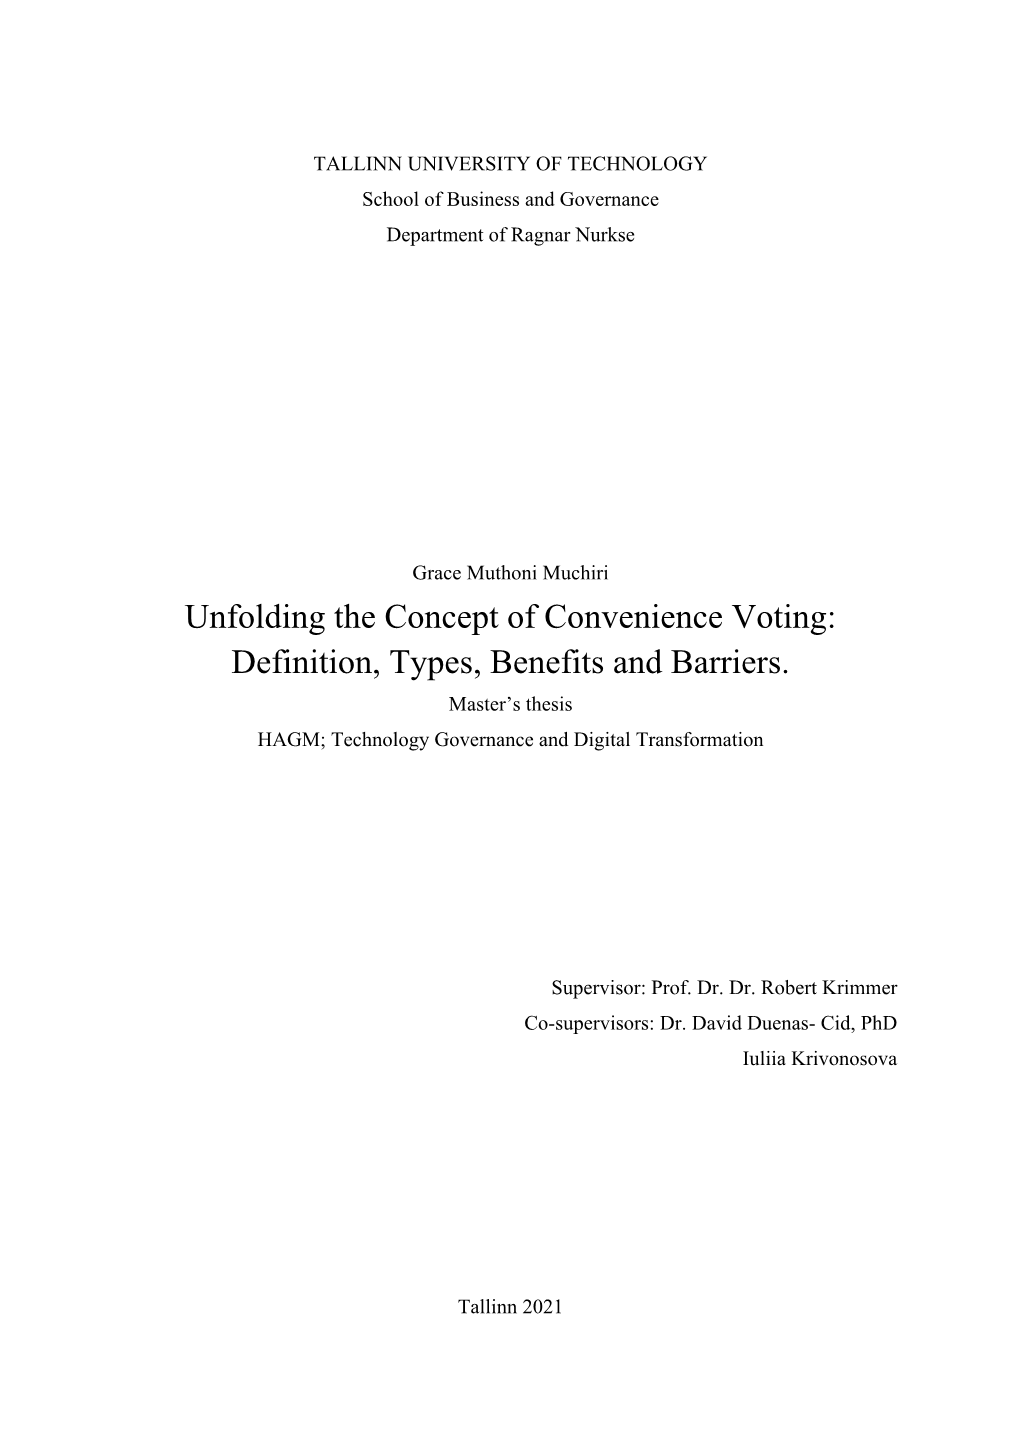 Unfolding the Concept of Convenience Voting: Definition, Types, Benefits and Barriers